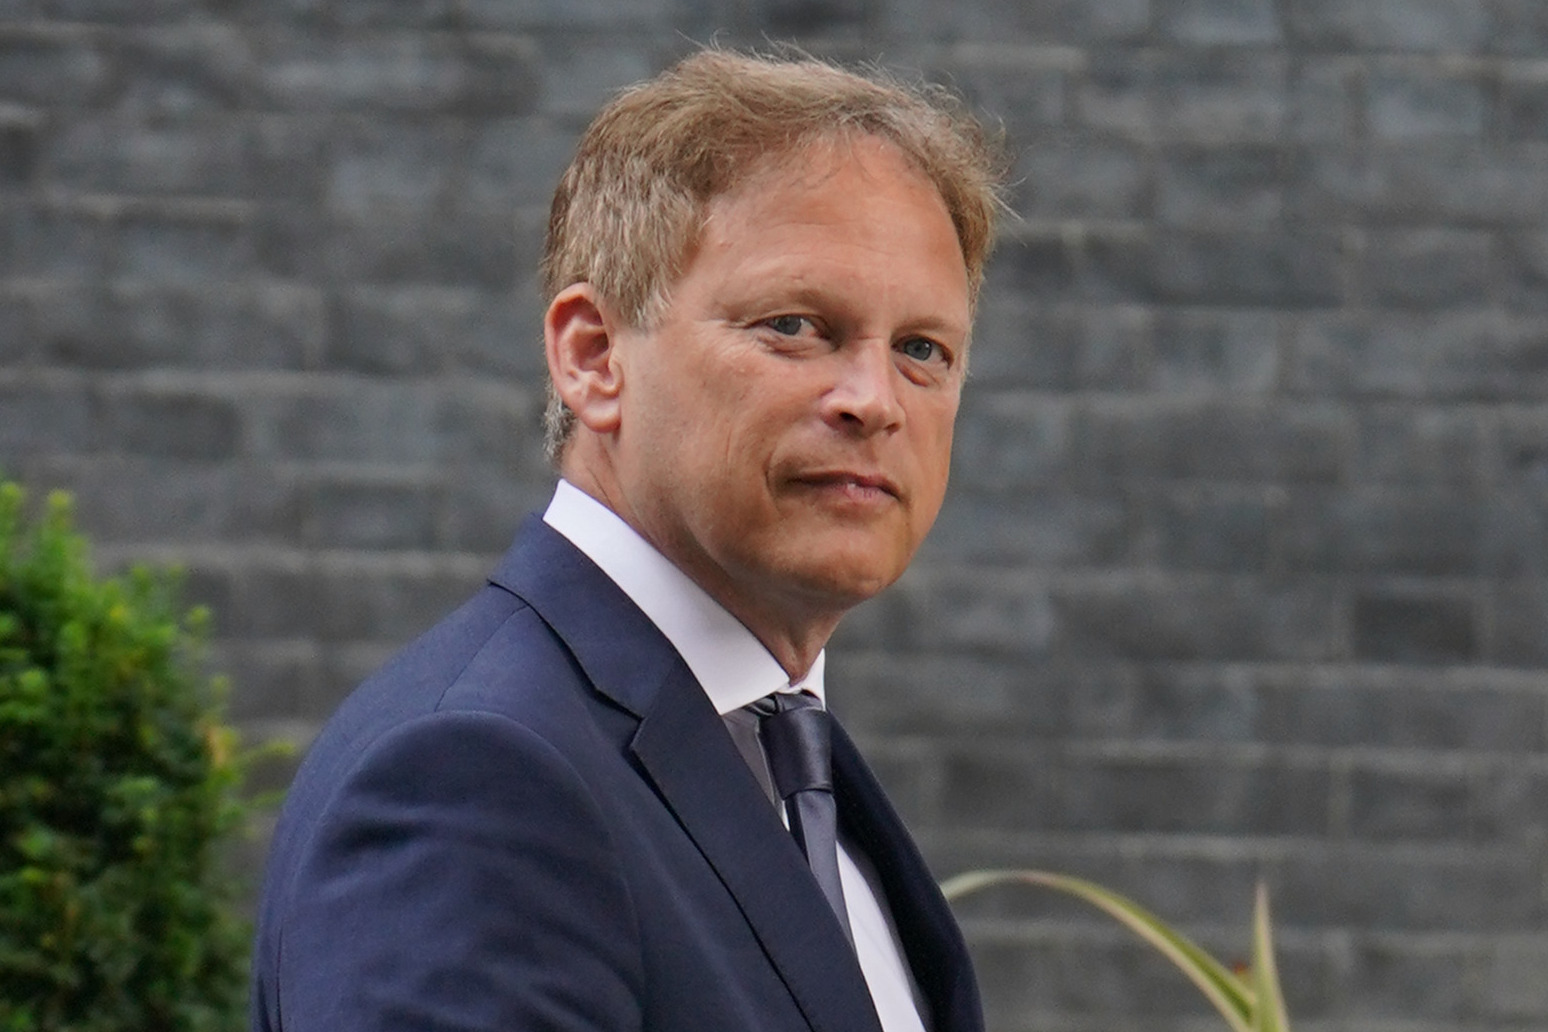 Grant Shapps is new Defence Secretary after Ben Wallace resignation 